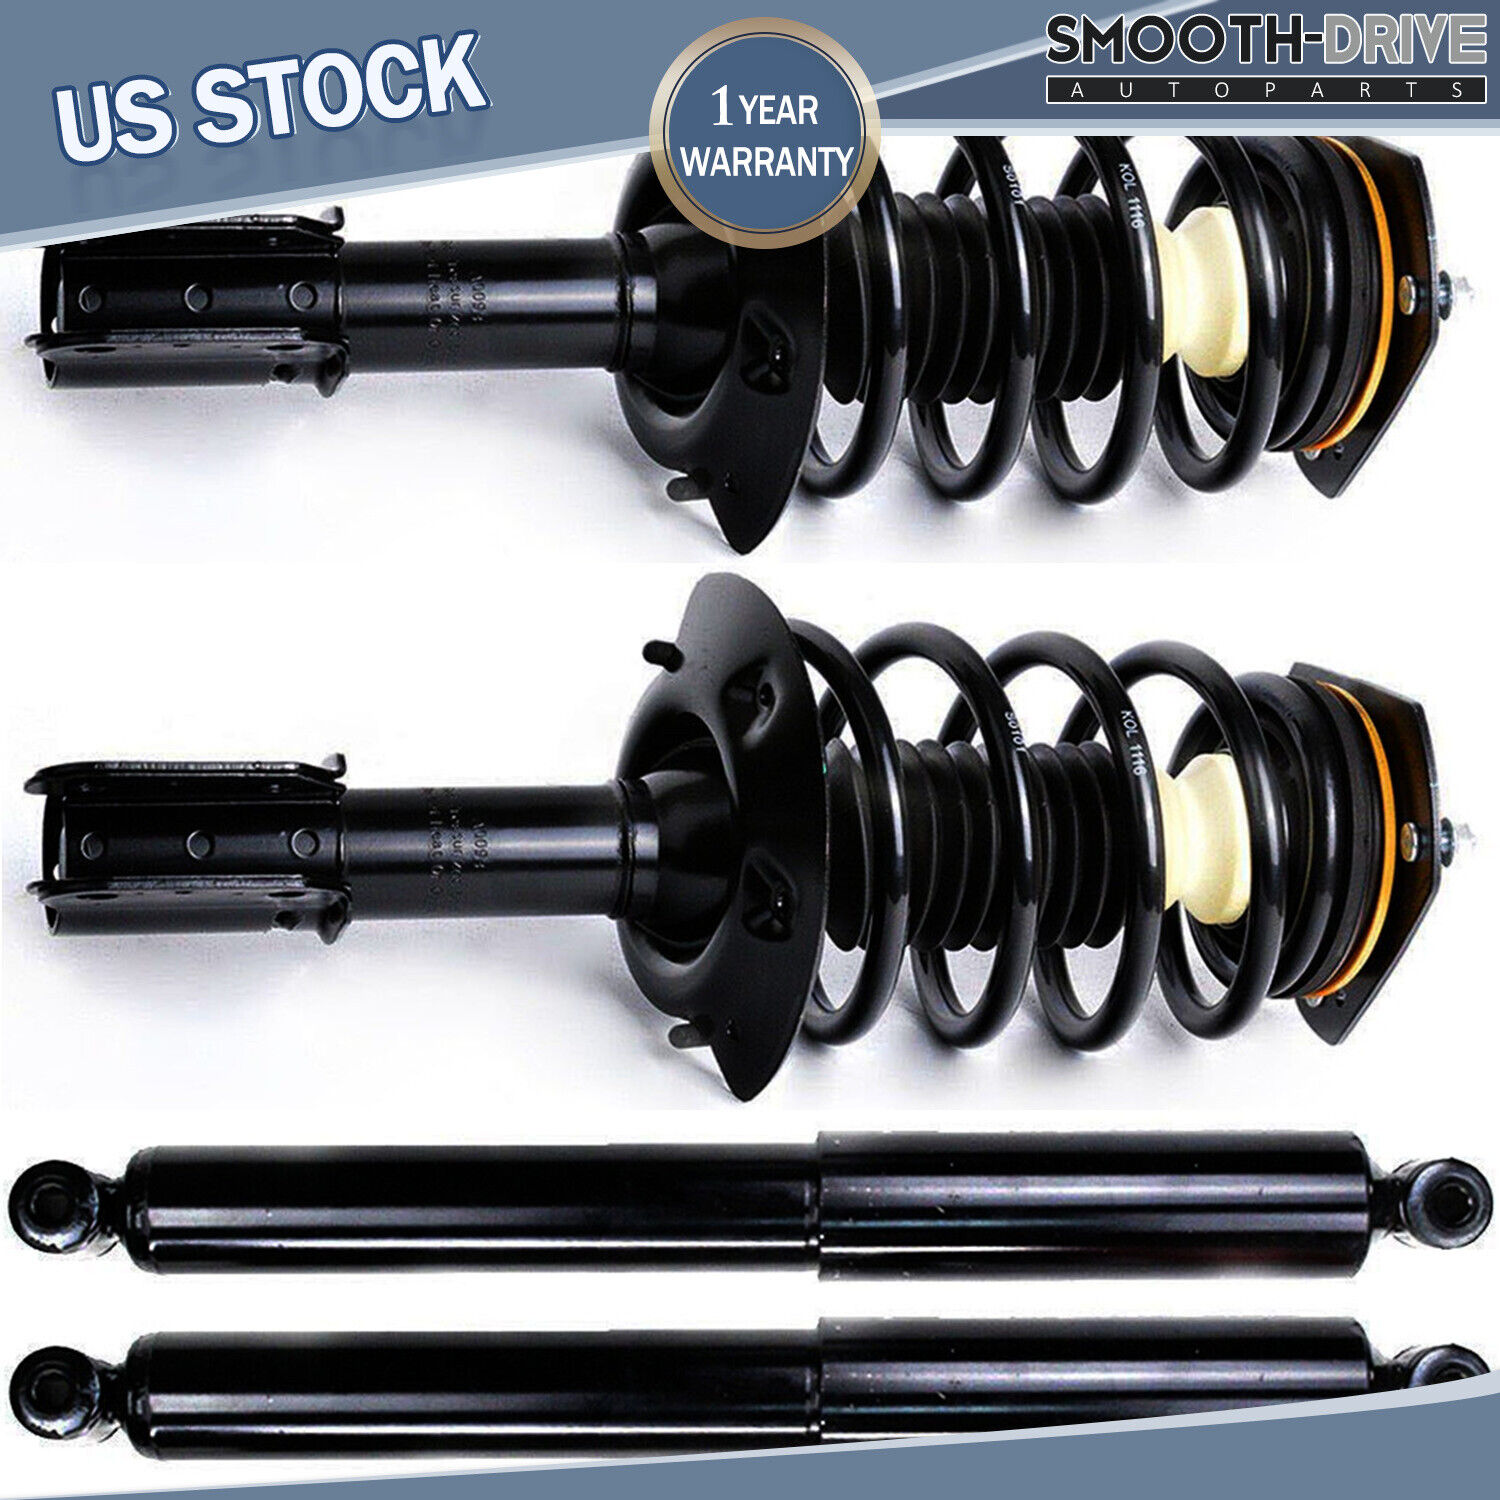 For 97 98 99 - 2005 Chevy Venture FWD Front Struts & Coil Springs Rear Shocks